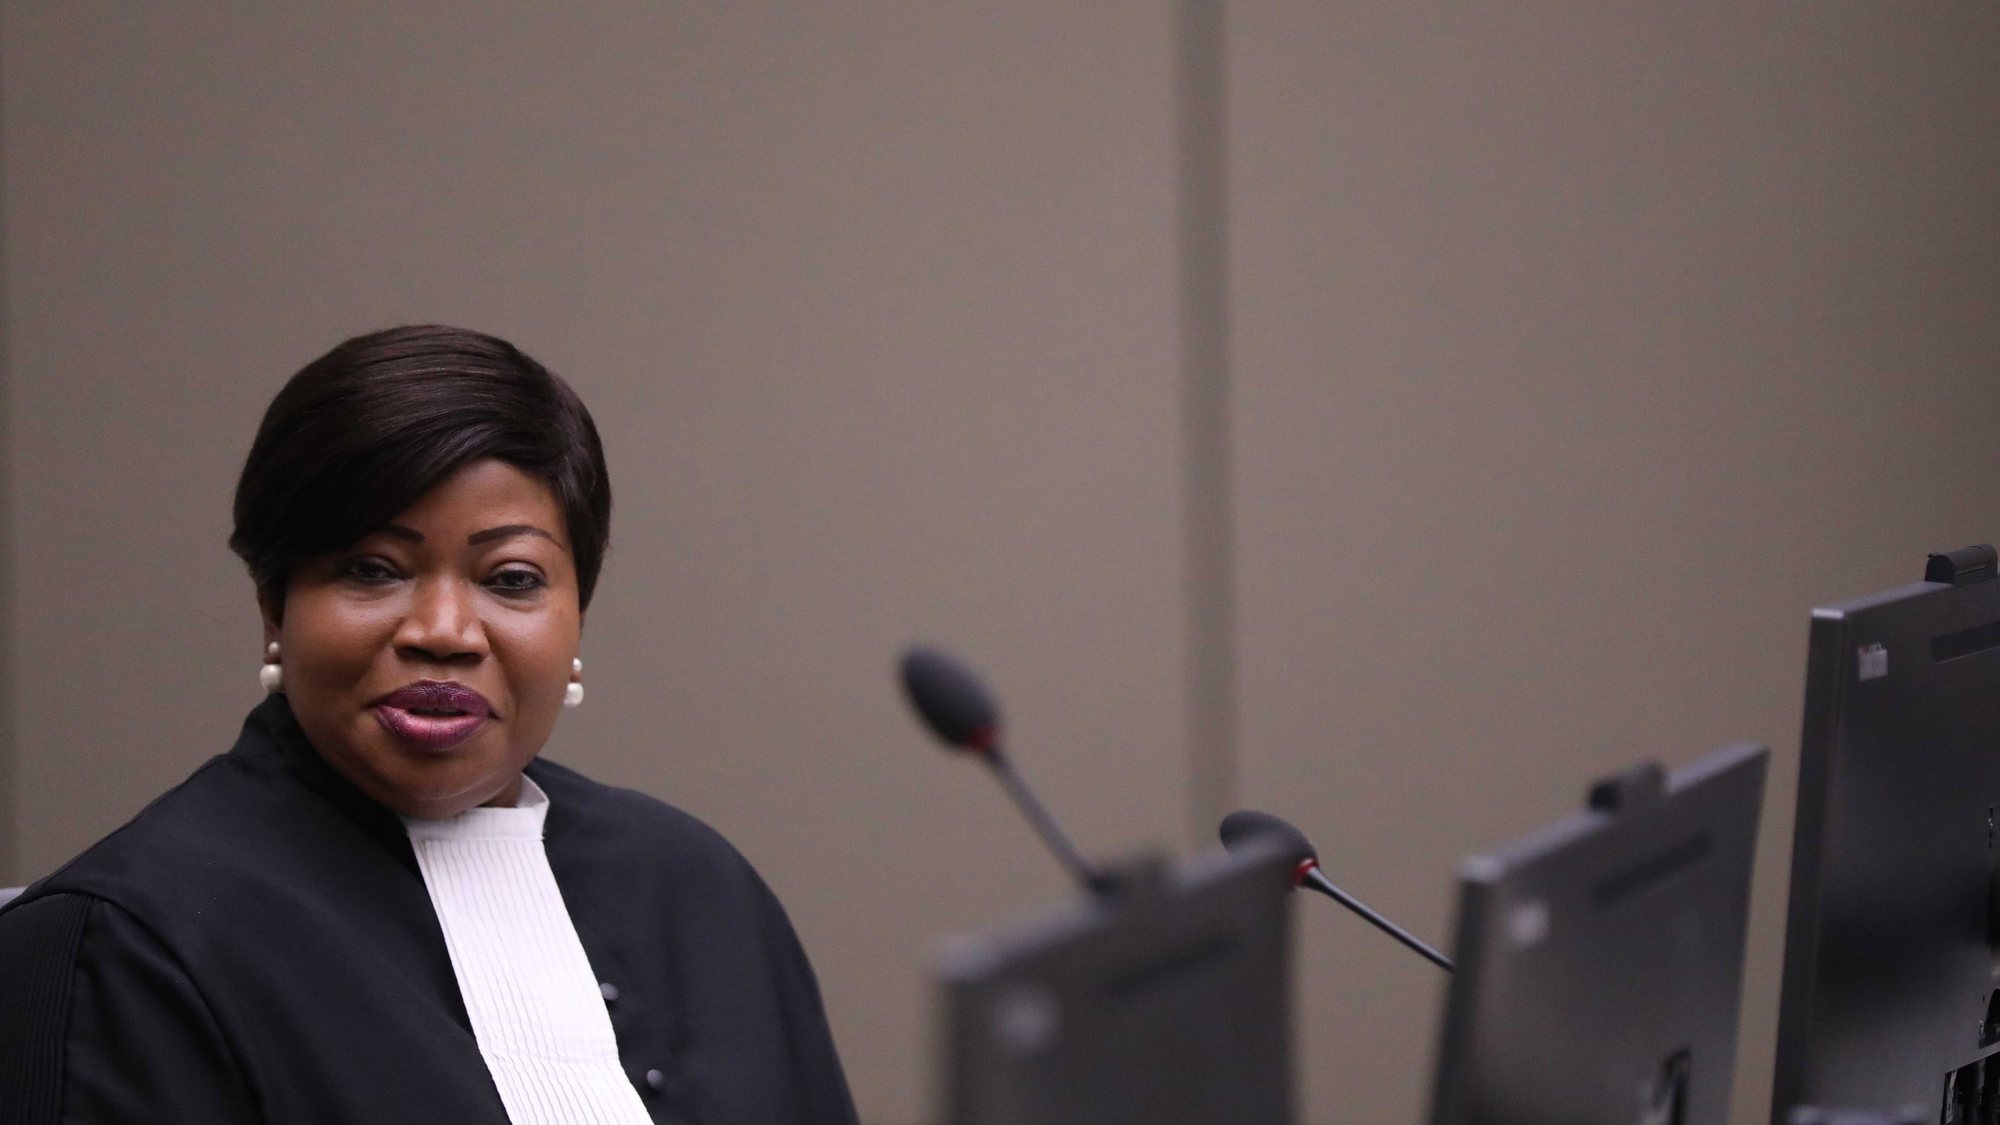 epa07703758 Prosecutor Fatou Bensouda appears in court during the trial of alleged Malian Islamist militant Al-Hassan Ag Abdoul Aziz Ag Mohamed Ag Mahmoud (not pictured), in the courtroom of the International Criminal Court (ICC) during his trial in the Hague, the Netherlands, 08 July 2019. He is charged with crimes against humanity and war crimes allegedly committed in Timbuktu.  EPA/EVA PLEVIER / POOL